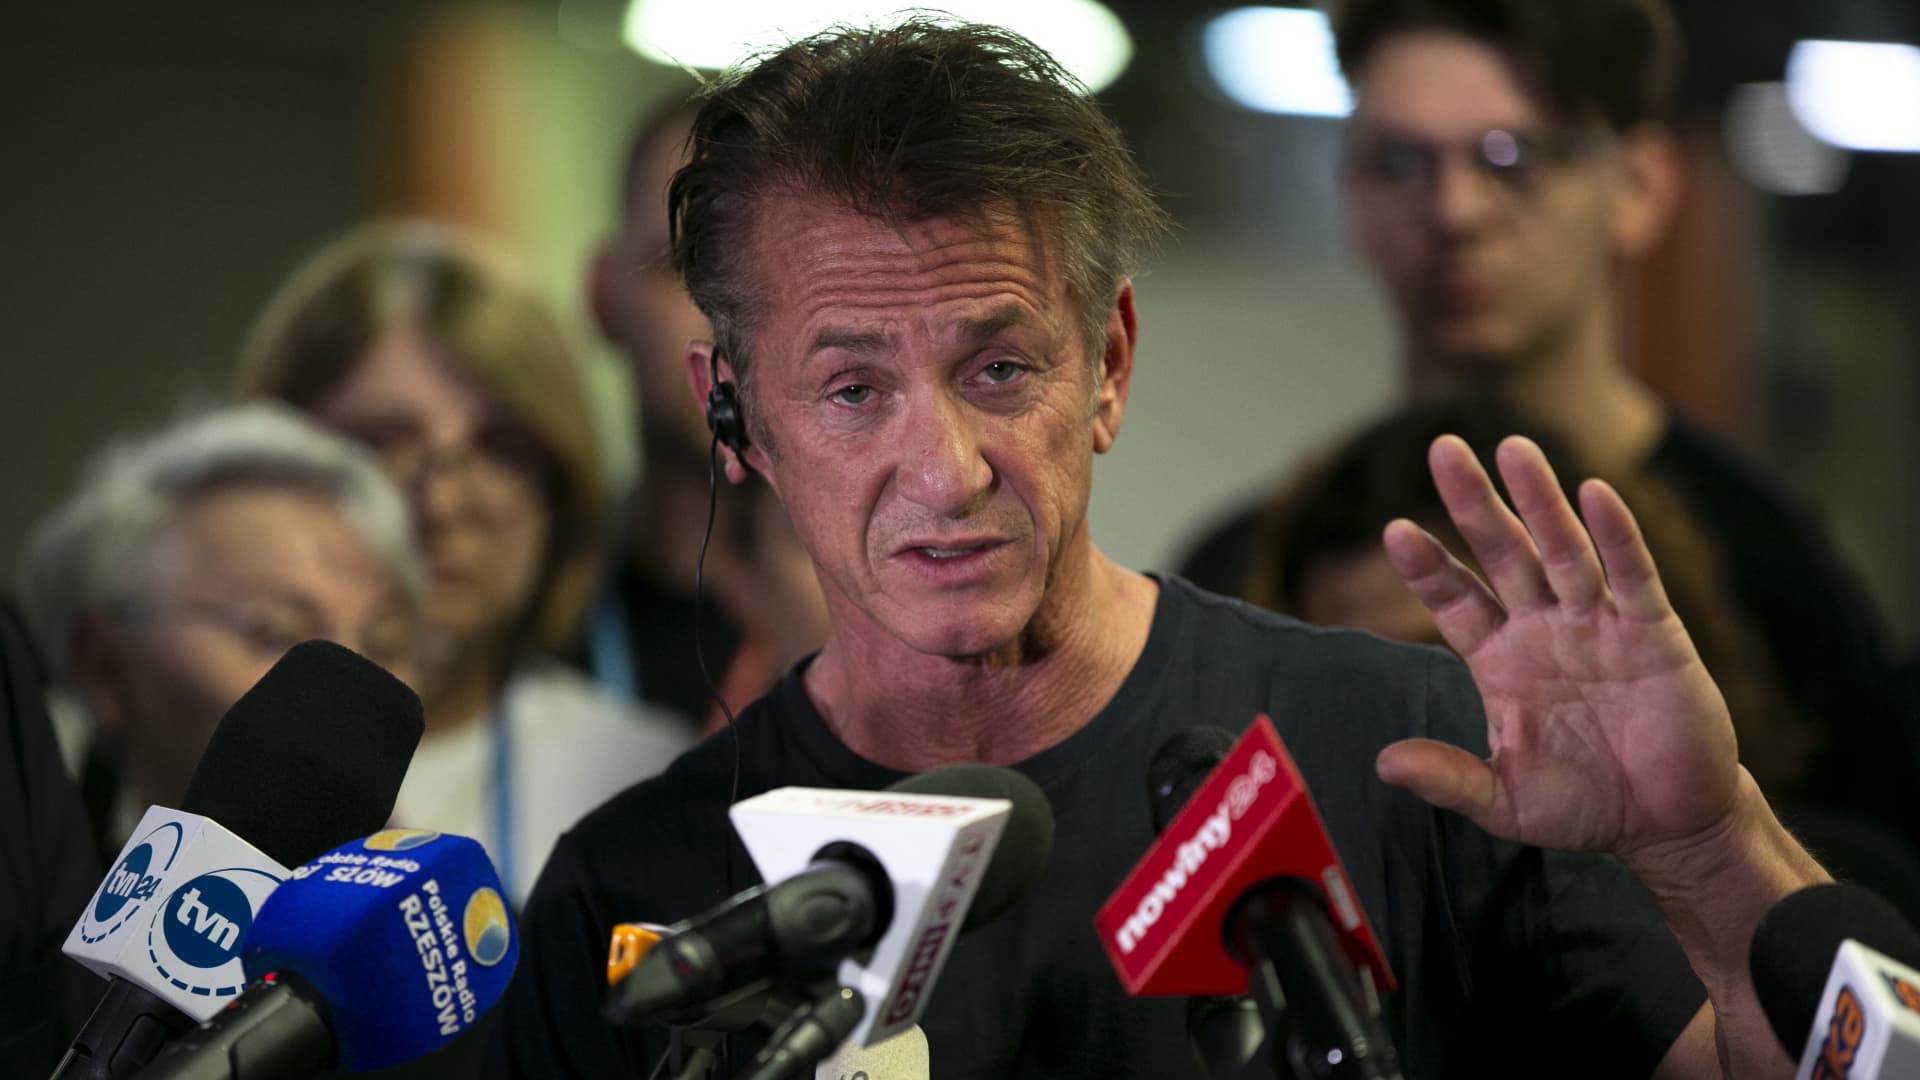 Hollywood star and founder of CORE (Community Organized Relief Effort) Sean Penn holds a press conference at a building housing refugees from Ukraine after signing an agreement with authorities to help refugees from Ukraine on March 25, 2022 in Rzeszow, Poland.